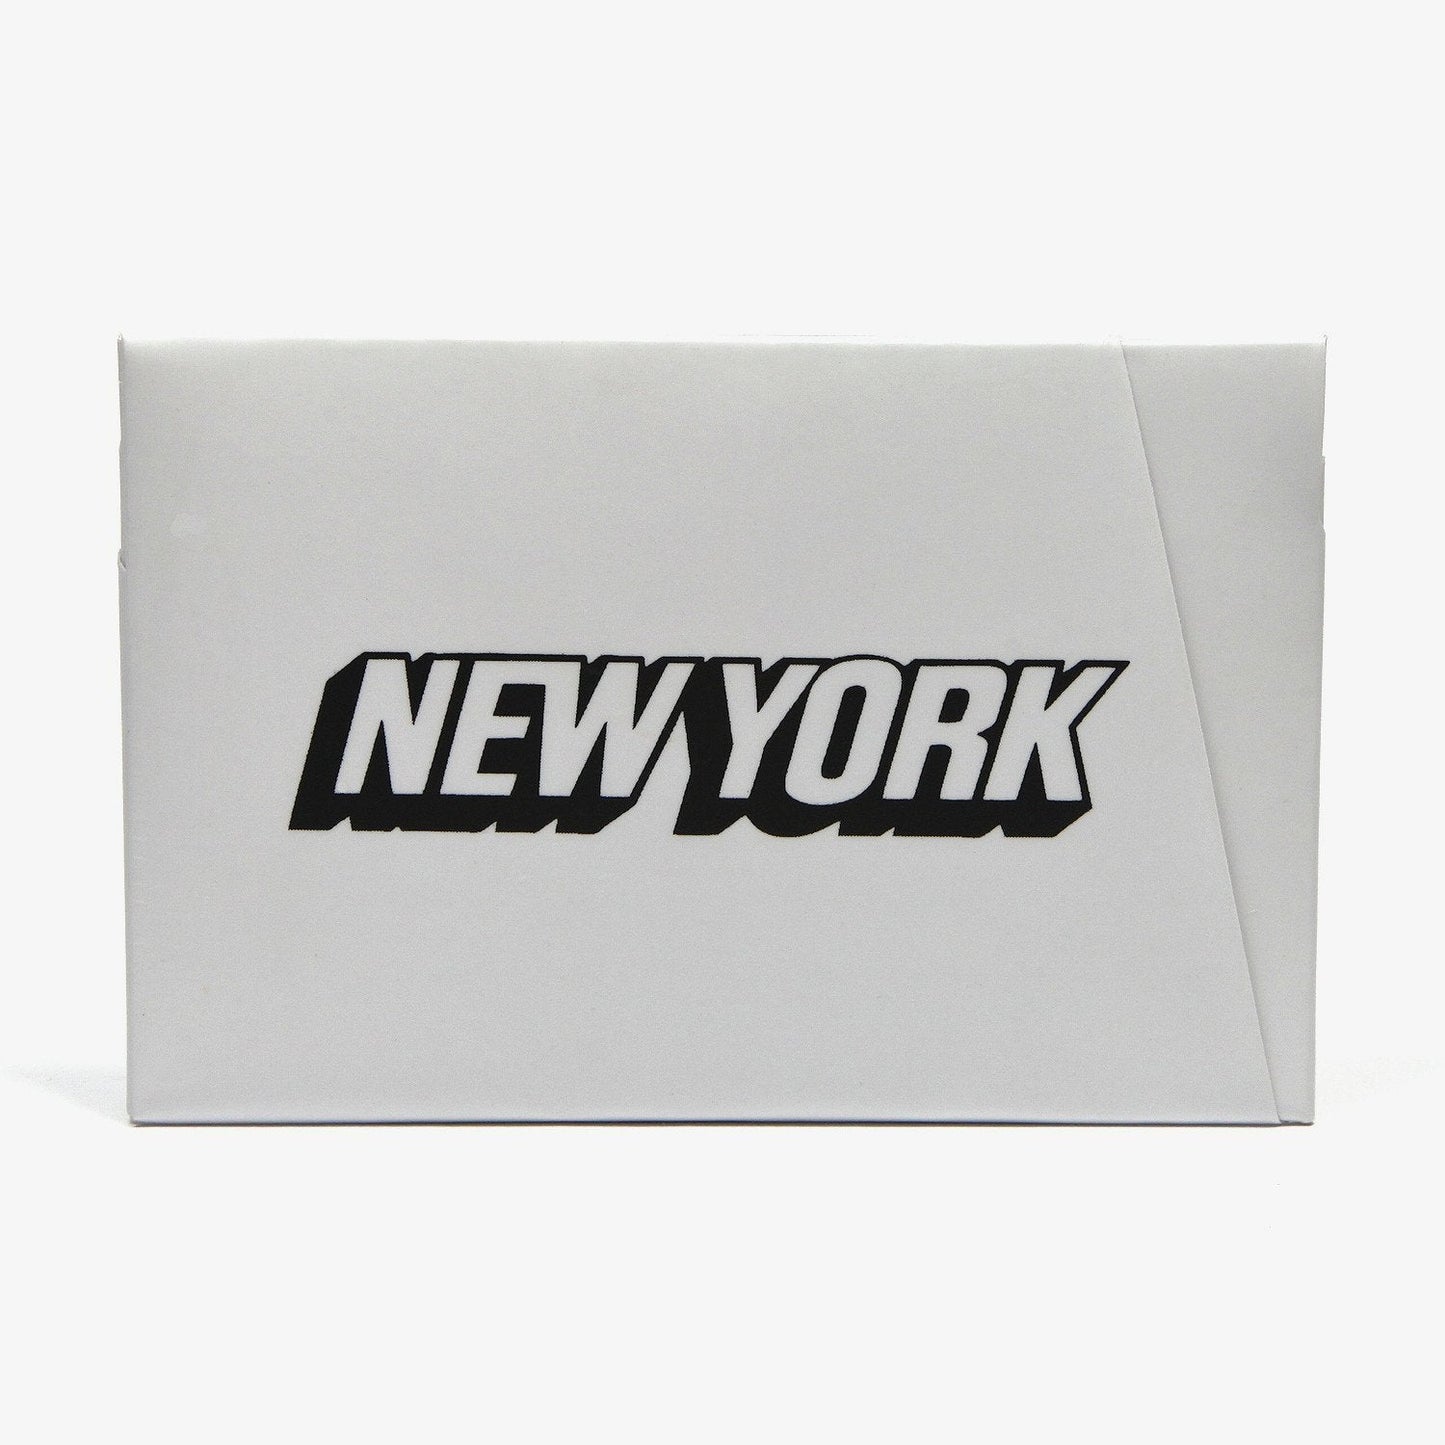 Empire State Card Wallet - The Walart - Paper Wallet